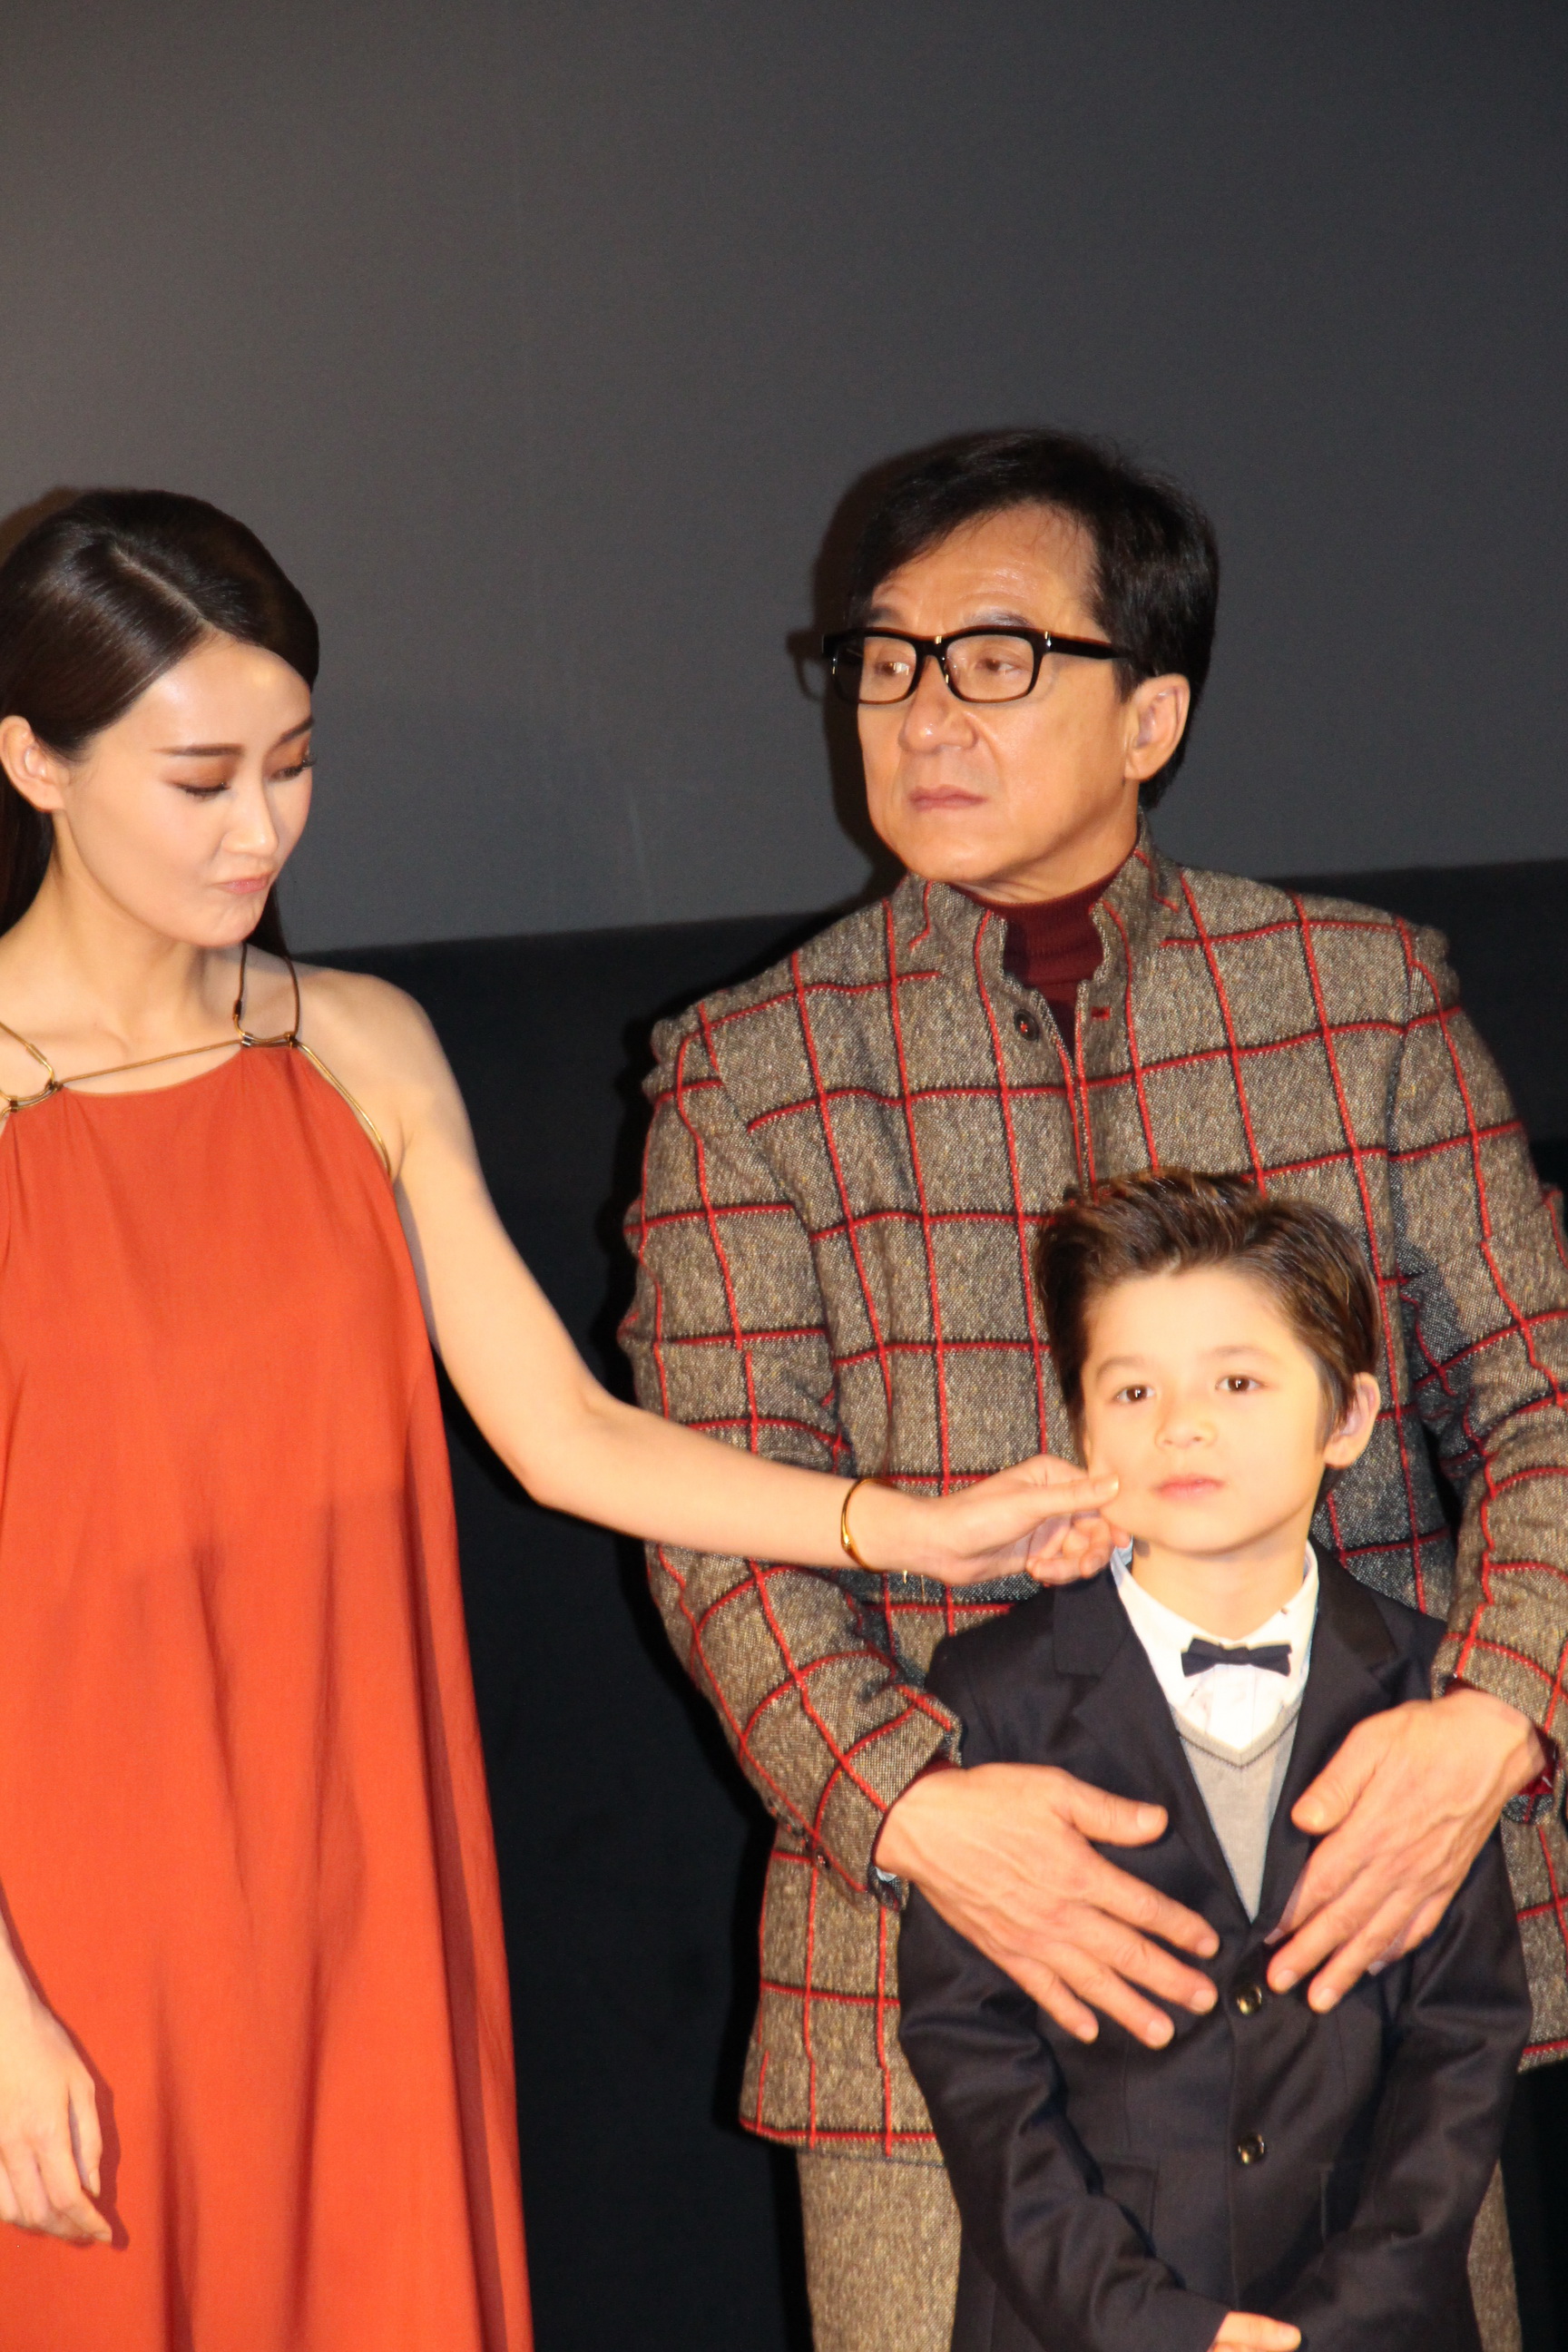 Lin Peng & Jackie Chan play with Jozef Waite in Beijing, China at the Dragon Blade premiere. February 2015.